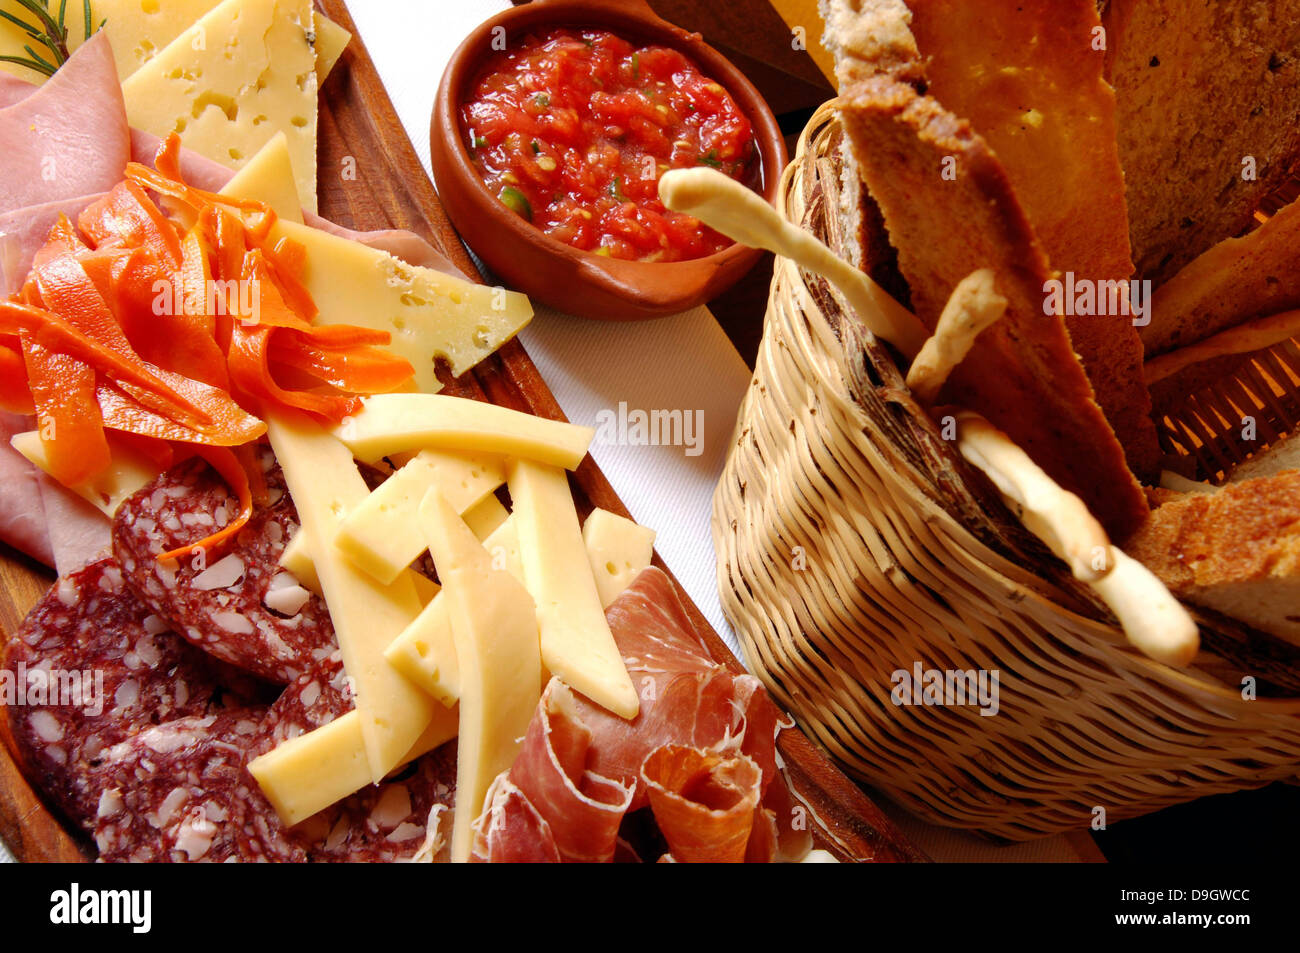 Andean cuisine. Still life with various Andean gastronomy products, cold cut of llama, cheeses and vegetables. Stock Photo